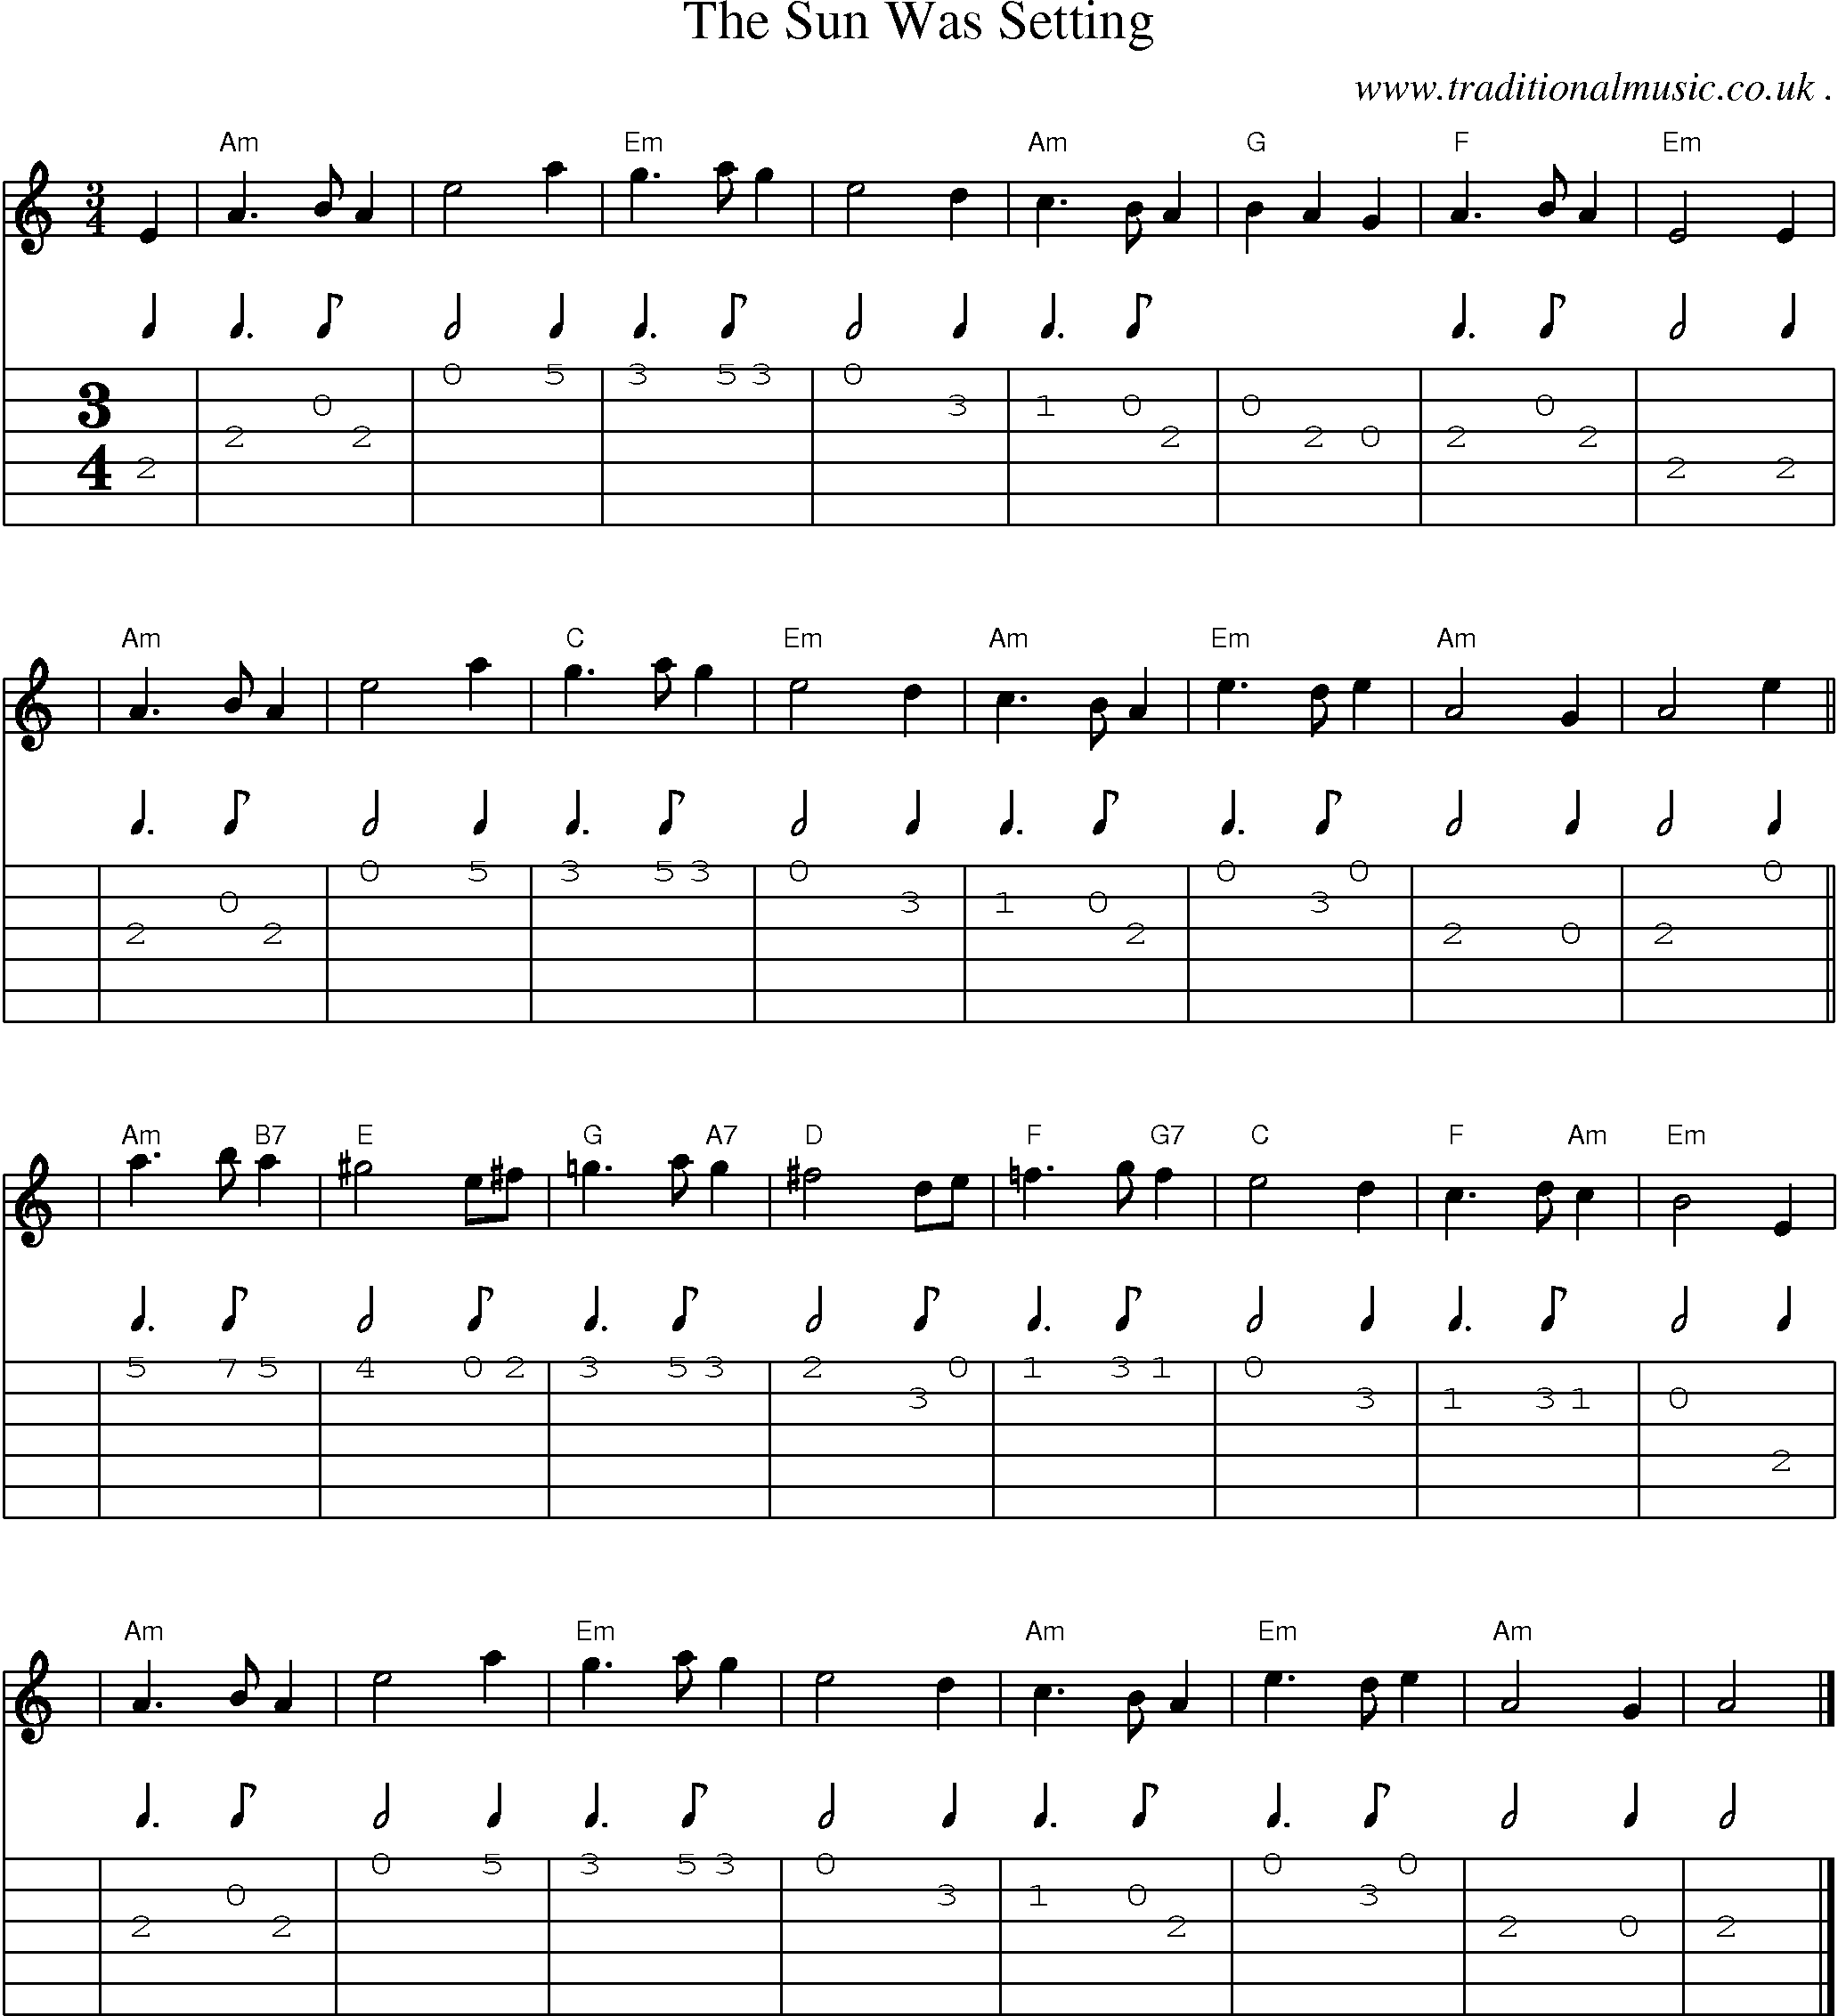 Sheet-music  score, Chords and Guitar Tabs for The Sun Was Setting